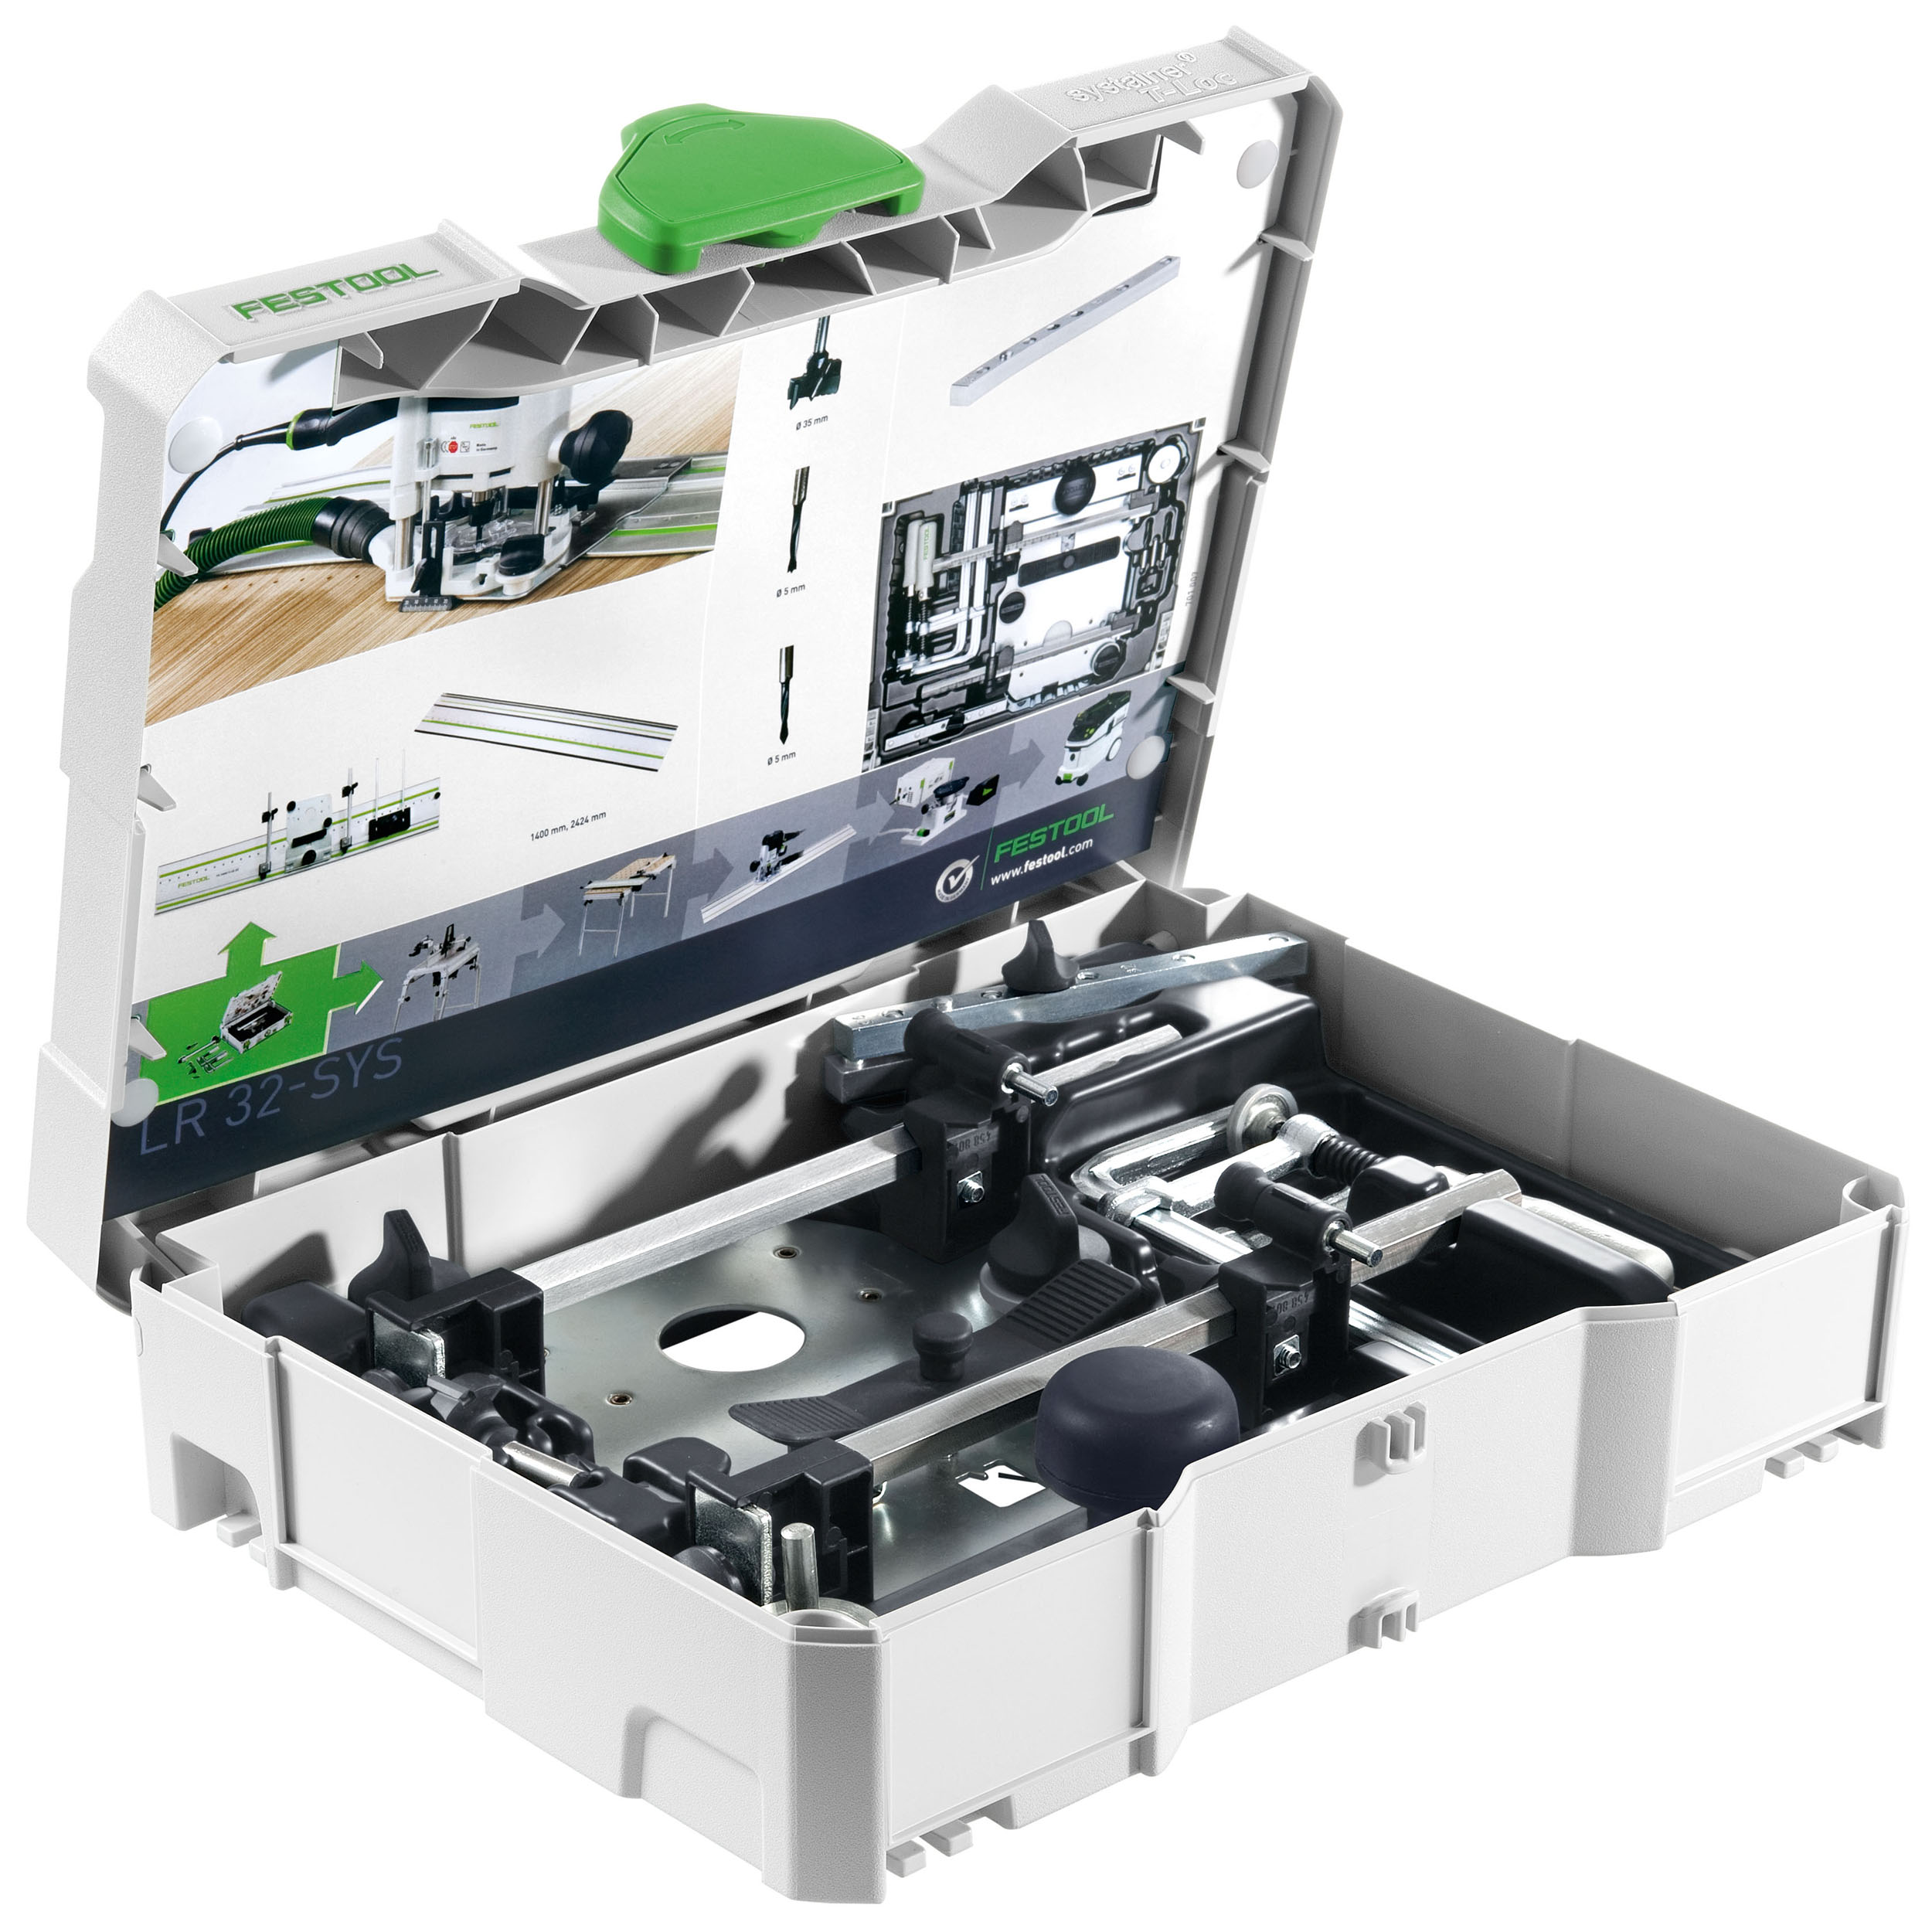 Festool Lr 32 Hole Drilling Set In Systainer